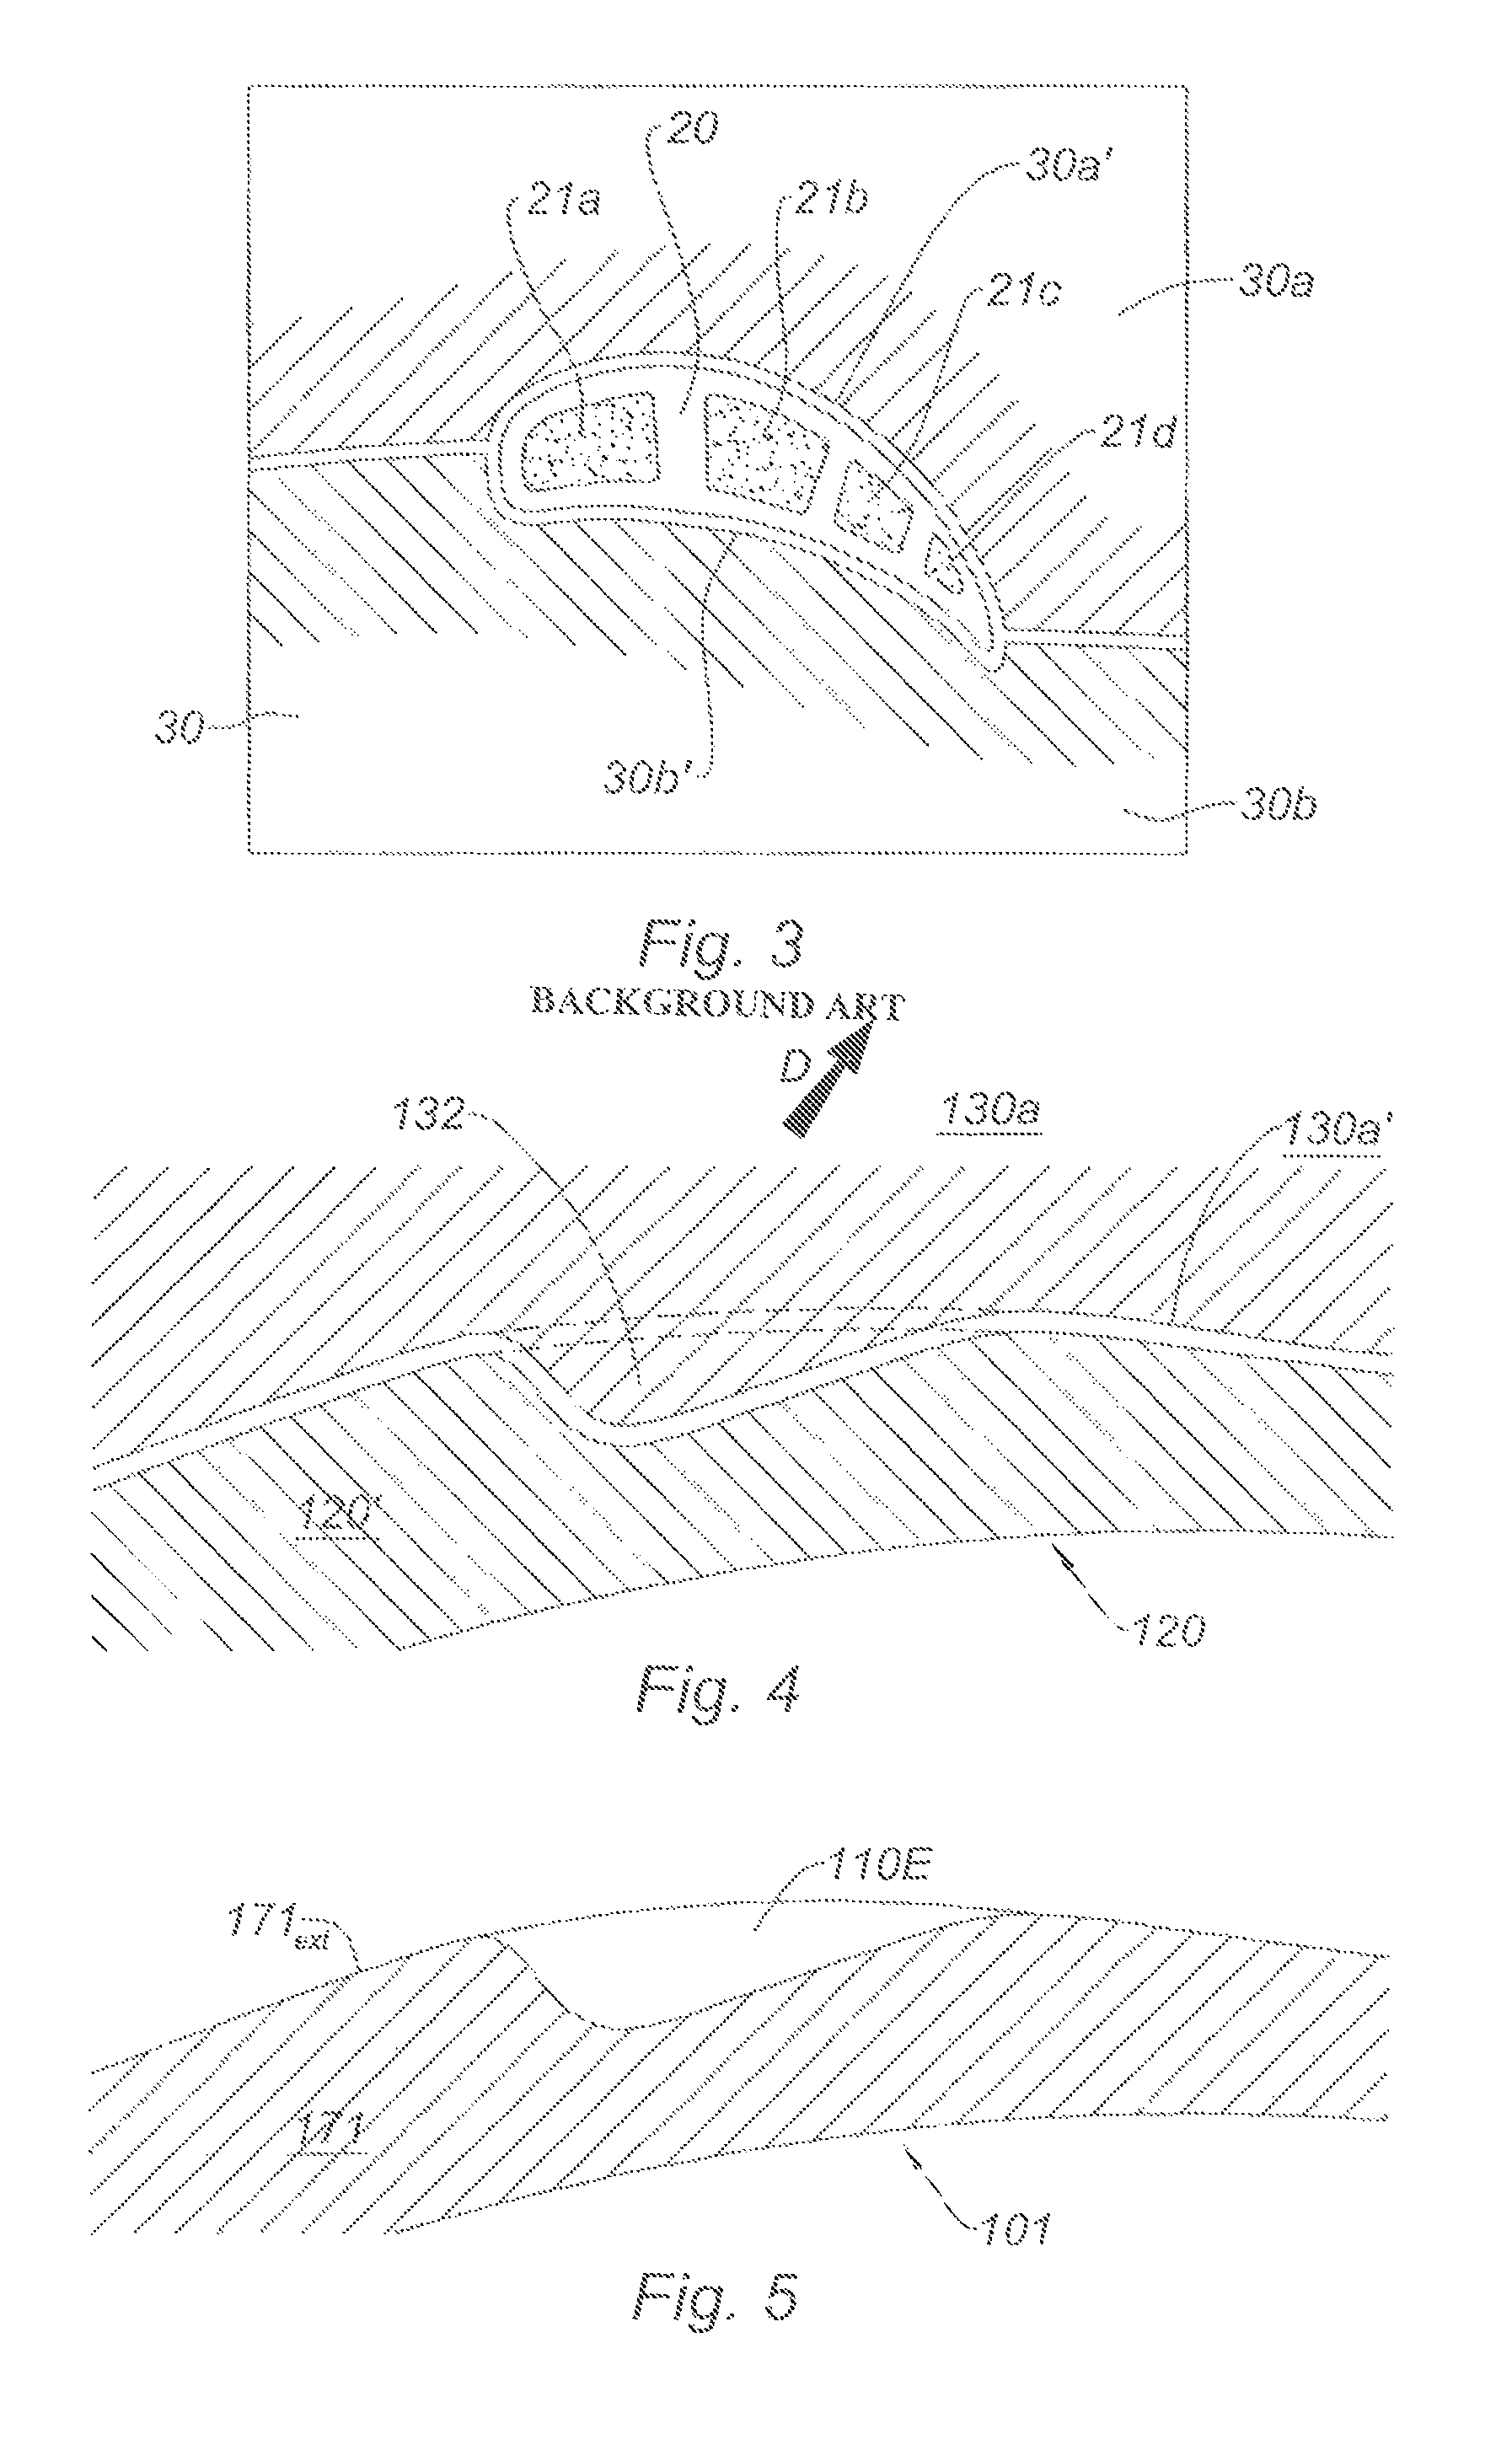 Method of manufacturing a turbomachine component that includes cooling air discharge orifices